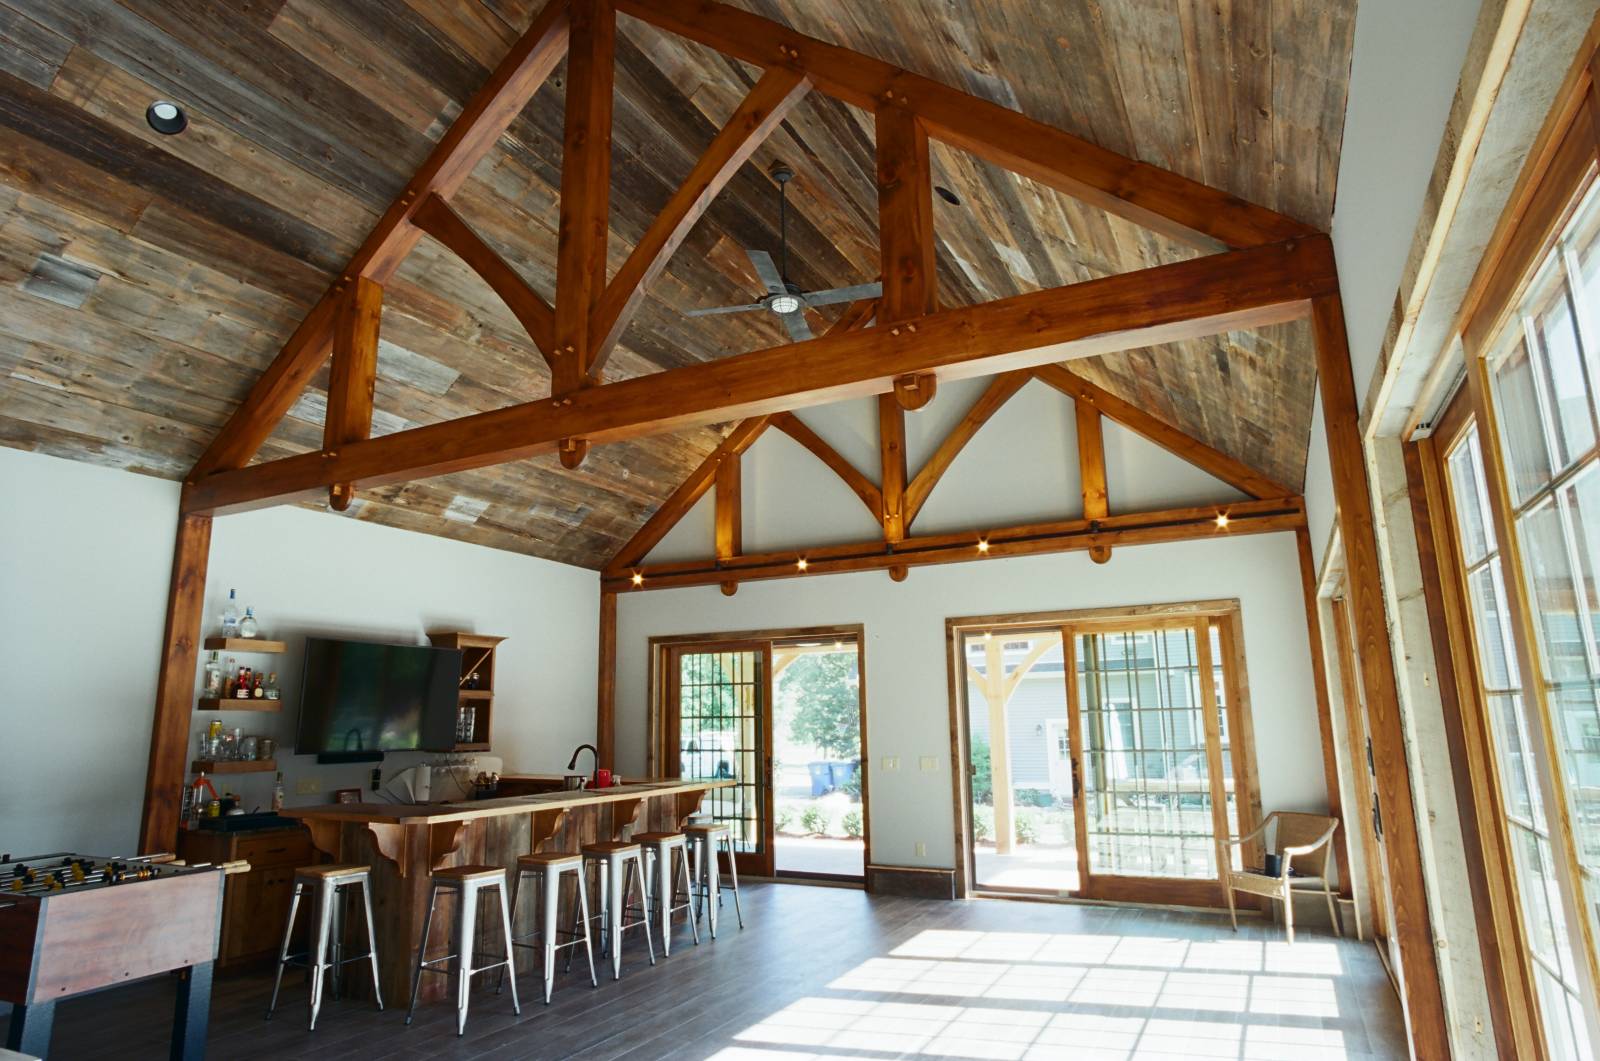 Interior of the Pool House • 24' Timber Trusses with Straight Bottom Chord • Reclaimed Barn Board Ceiling